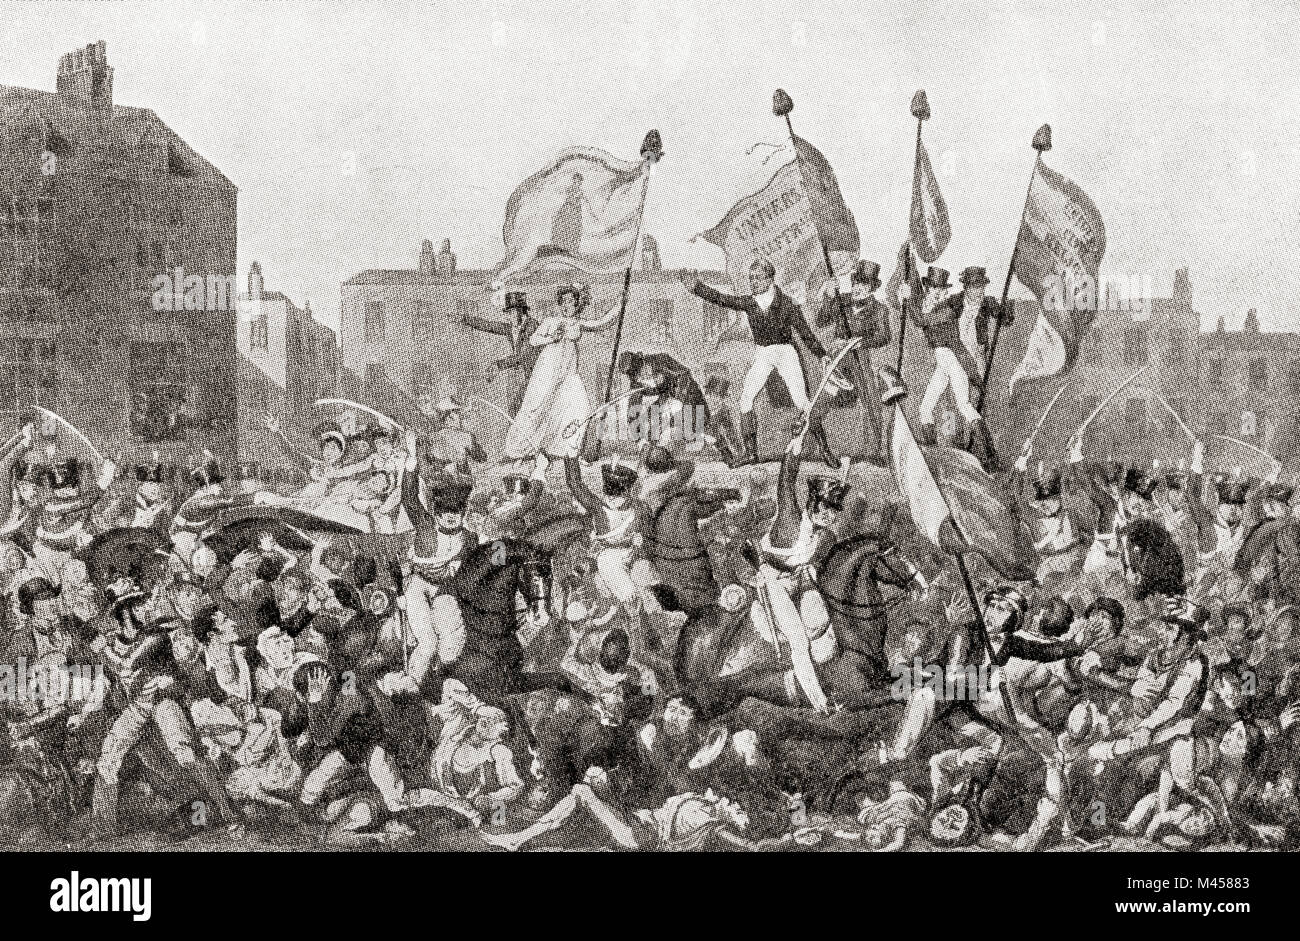 The Peterloo Massacre, St Peter's Field, Manchester, England, 1819.  The cavalry charged into a crowd of 60,000–80,000 who had gathered to demand the reform of parliamentary representation.  From The Martyrs of Tolpuddle, published 1934. Stock Photo